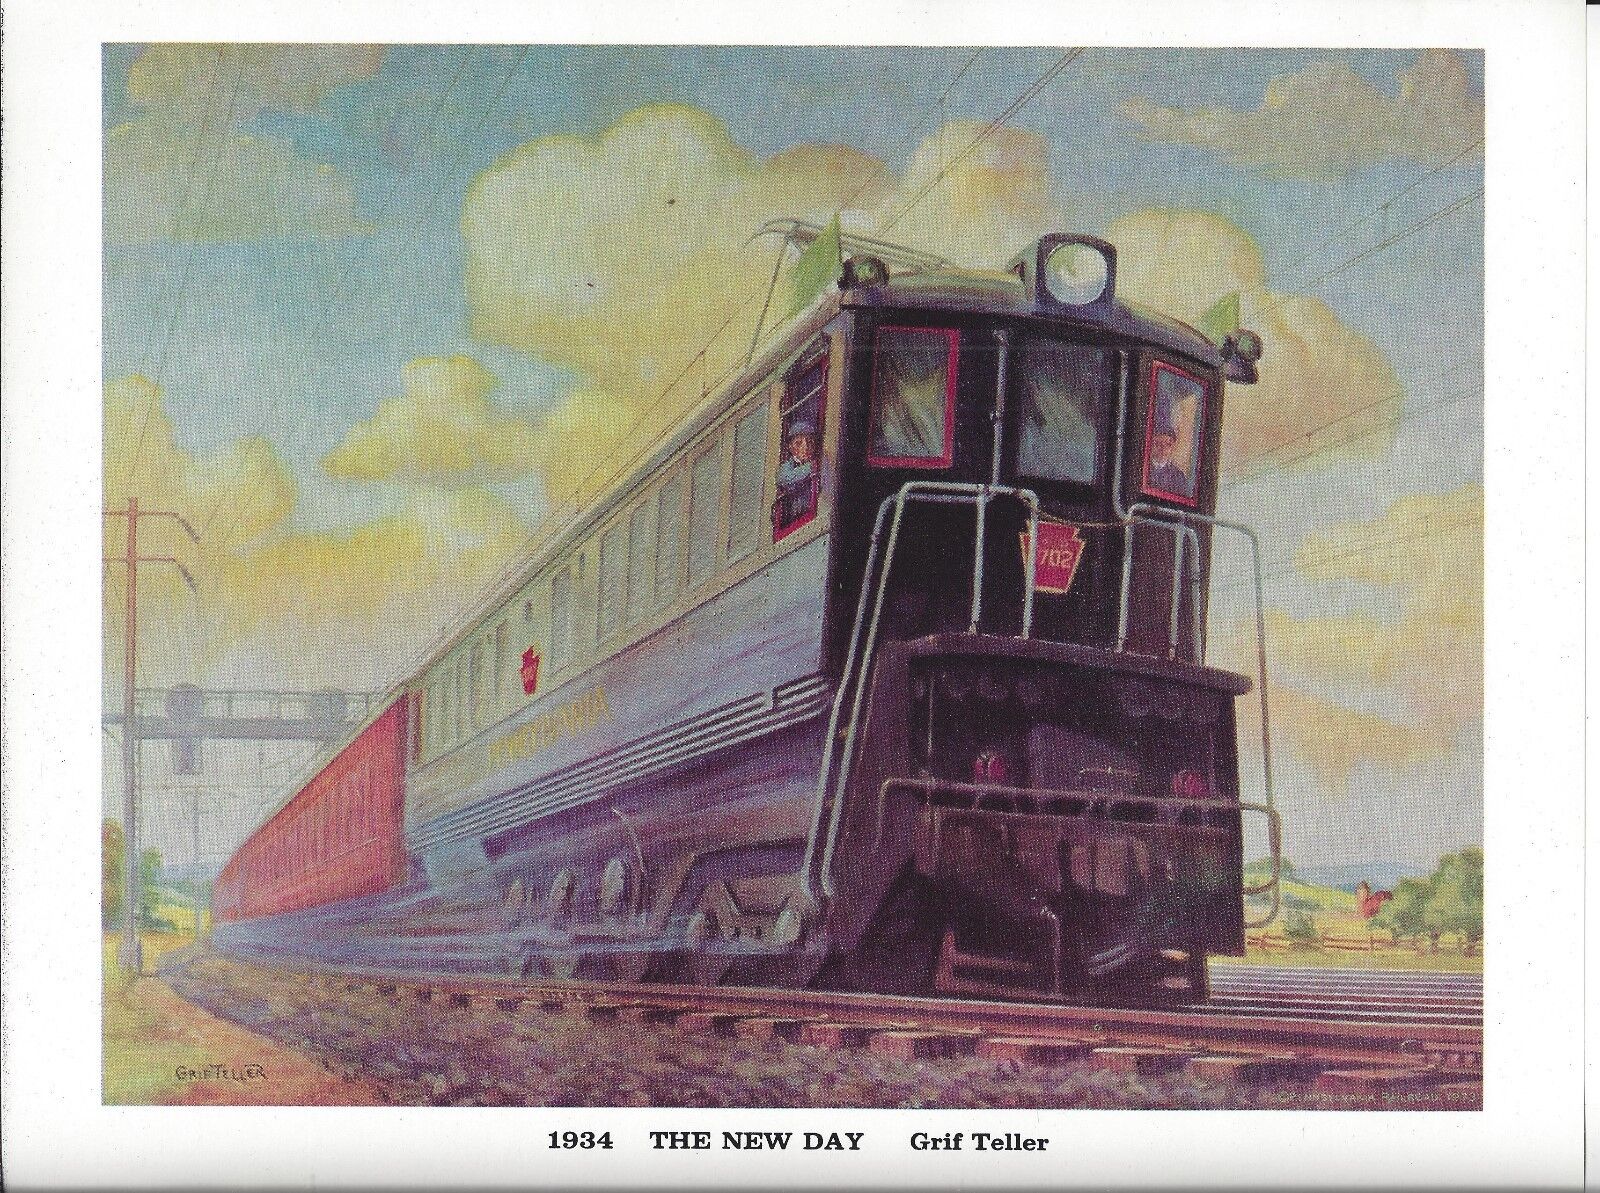 1934 The New Day By Grif Teller 8 1/2x11" Print